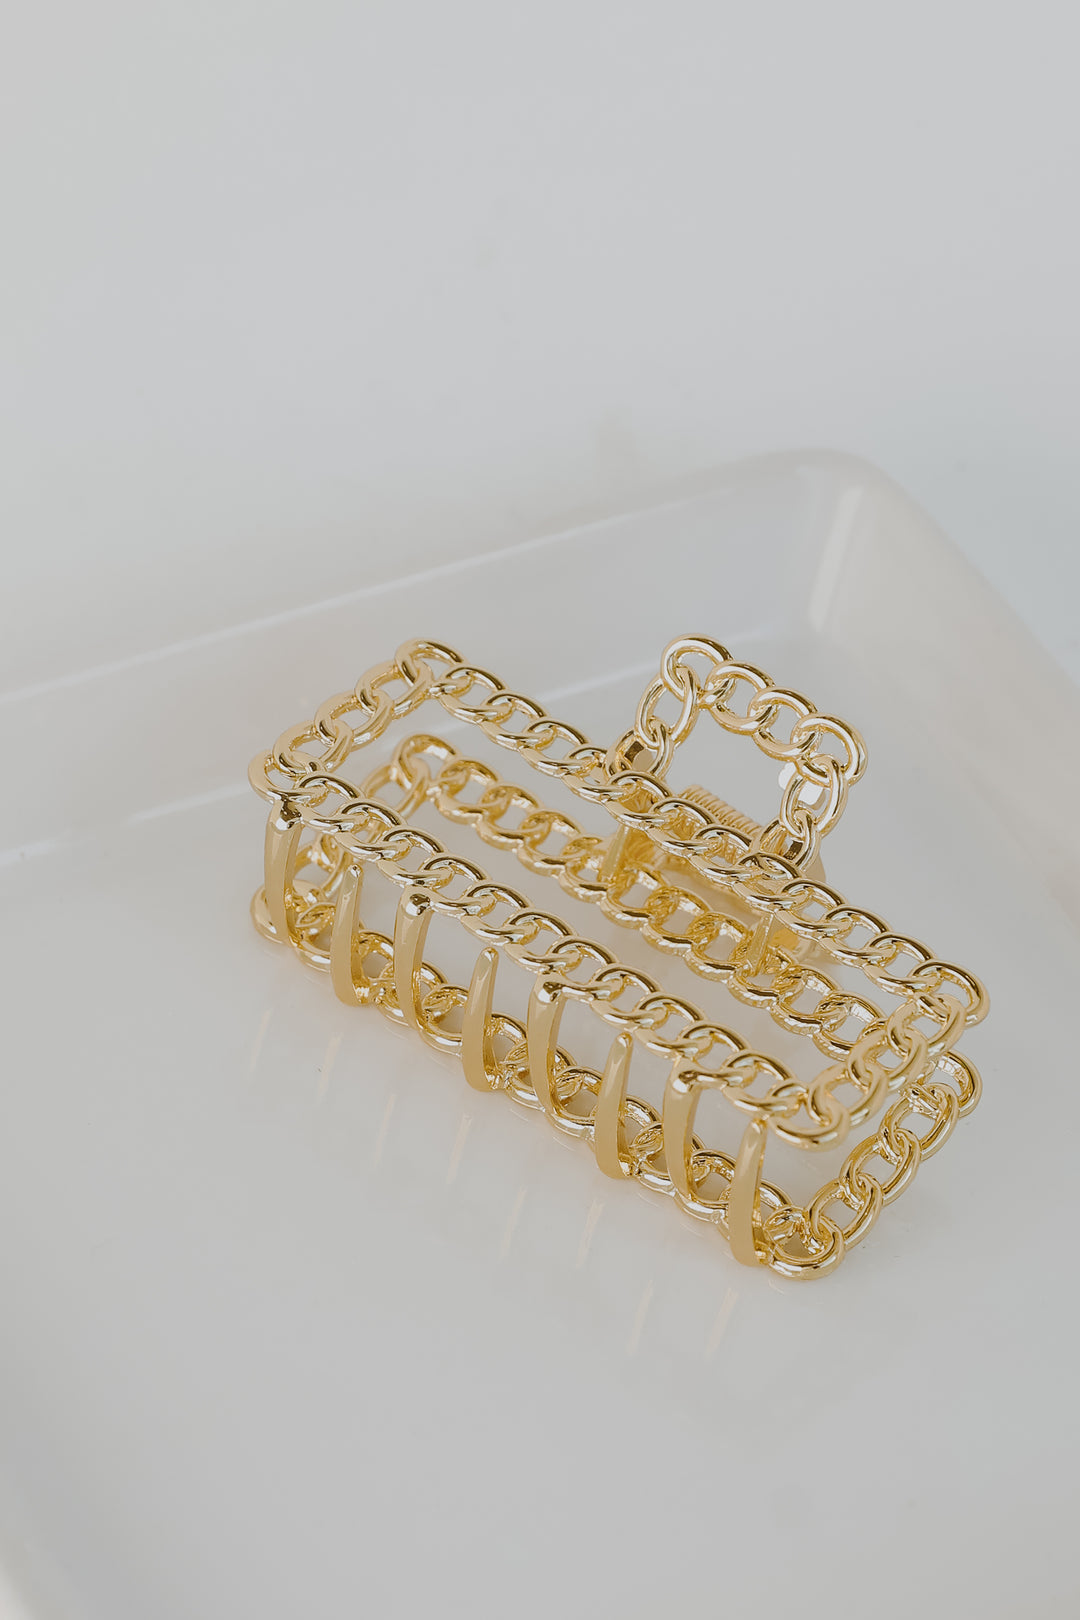 Gold Chainlink Claw Hair Clip from dress up